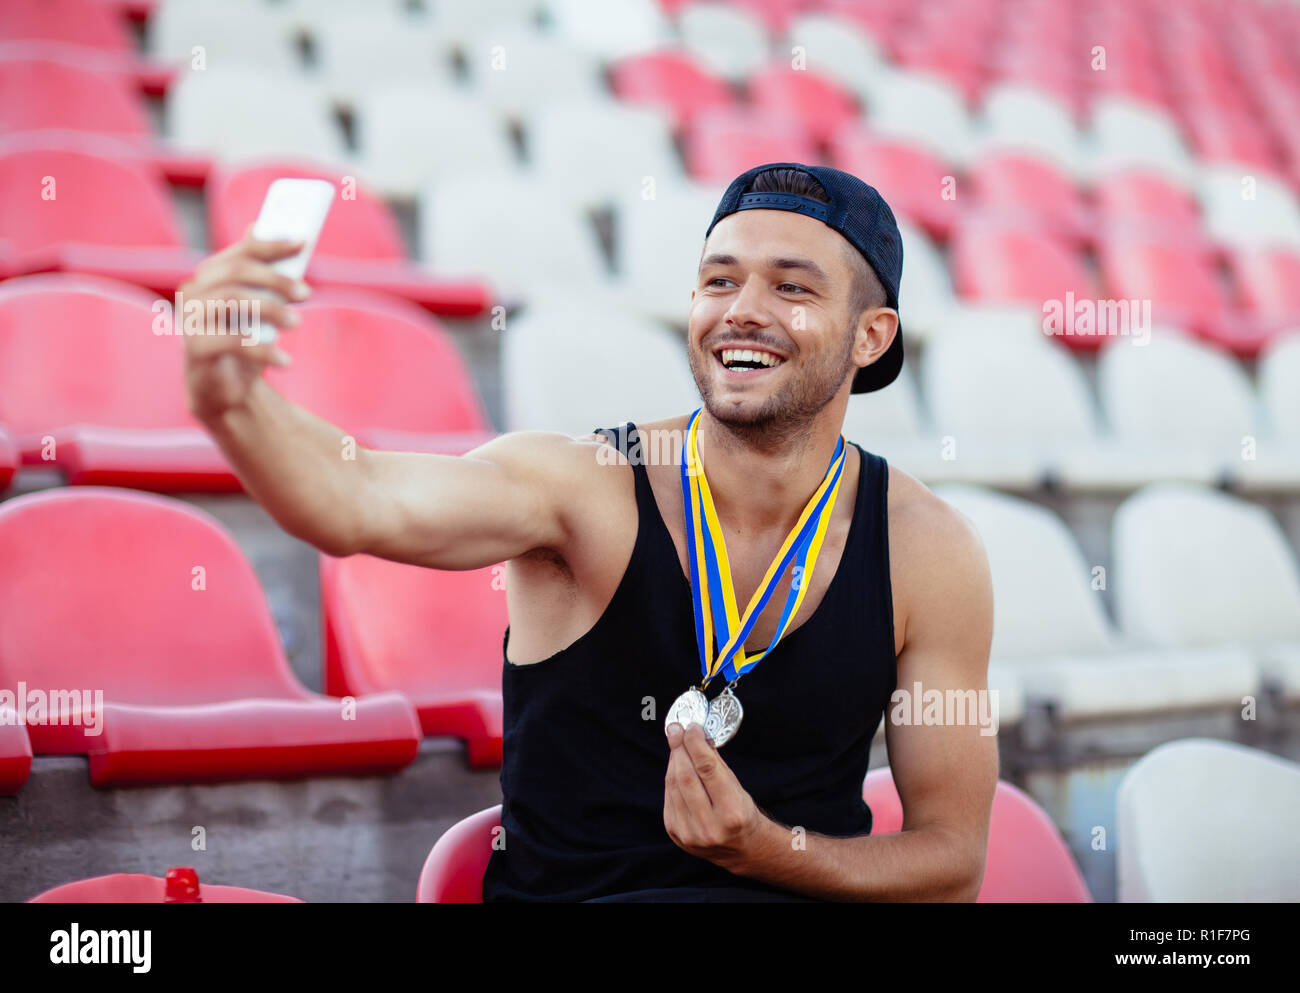 Winner with medals making selfie. Champion takes moment of triumph. Victory concept Stock Photo